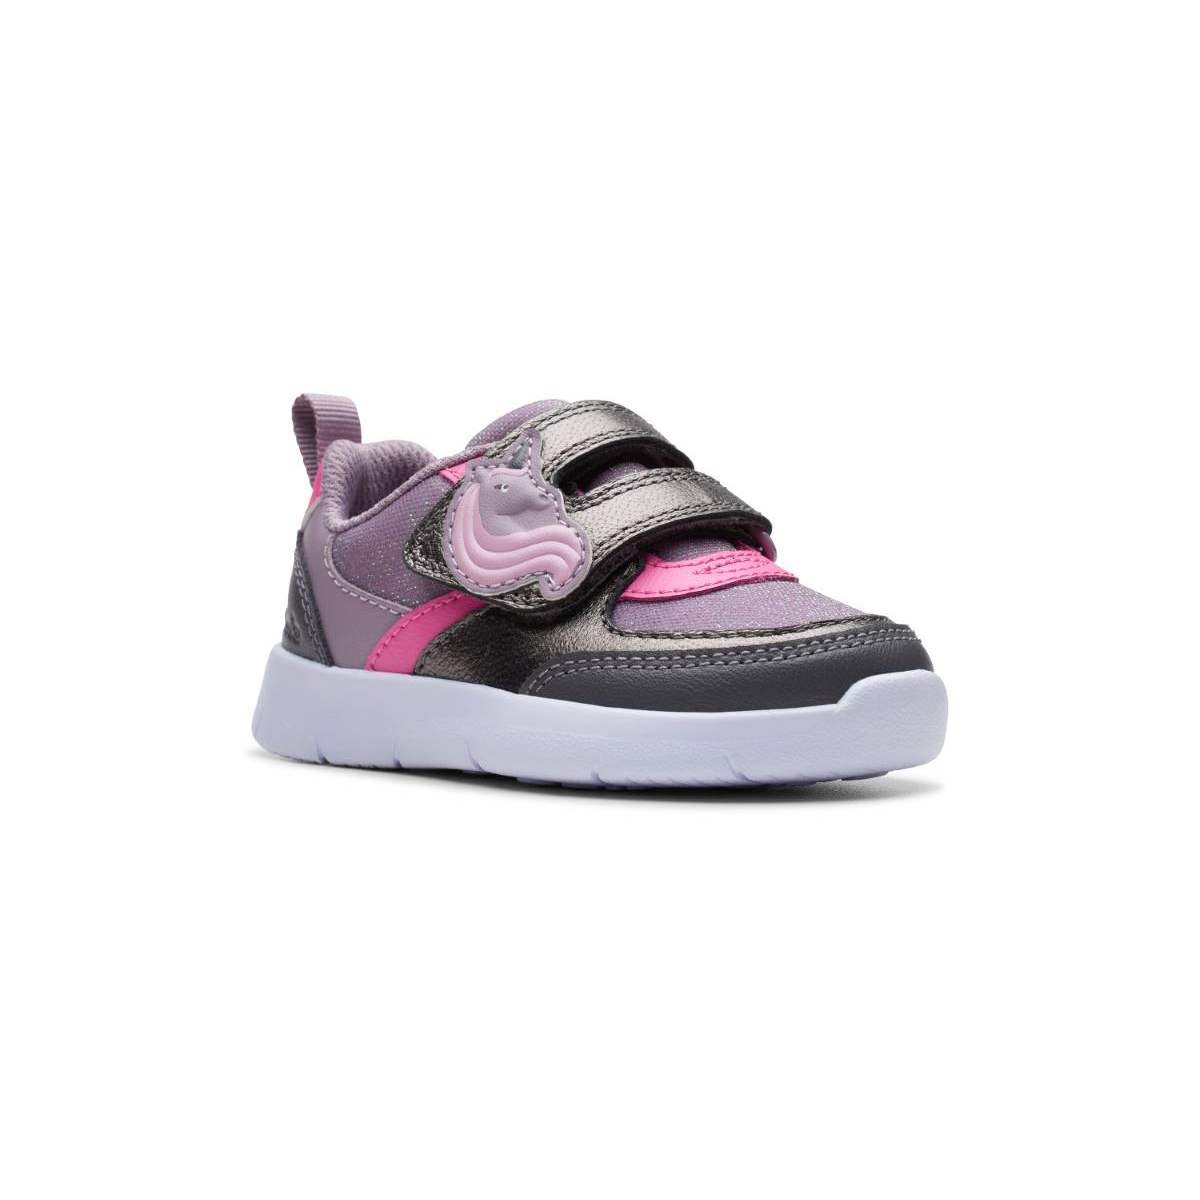 Clarks Ath Shimmer T Purple multi Kids toddler girls trainers 7645-87G in a Plain Leather and Textile in Size 5.5